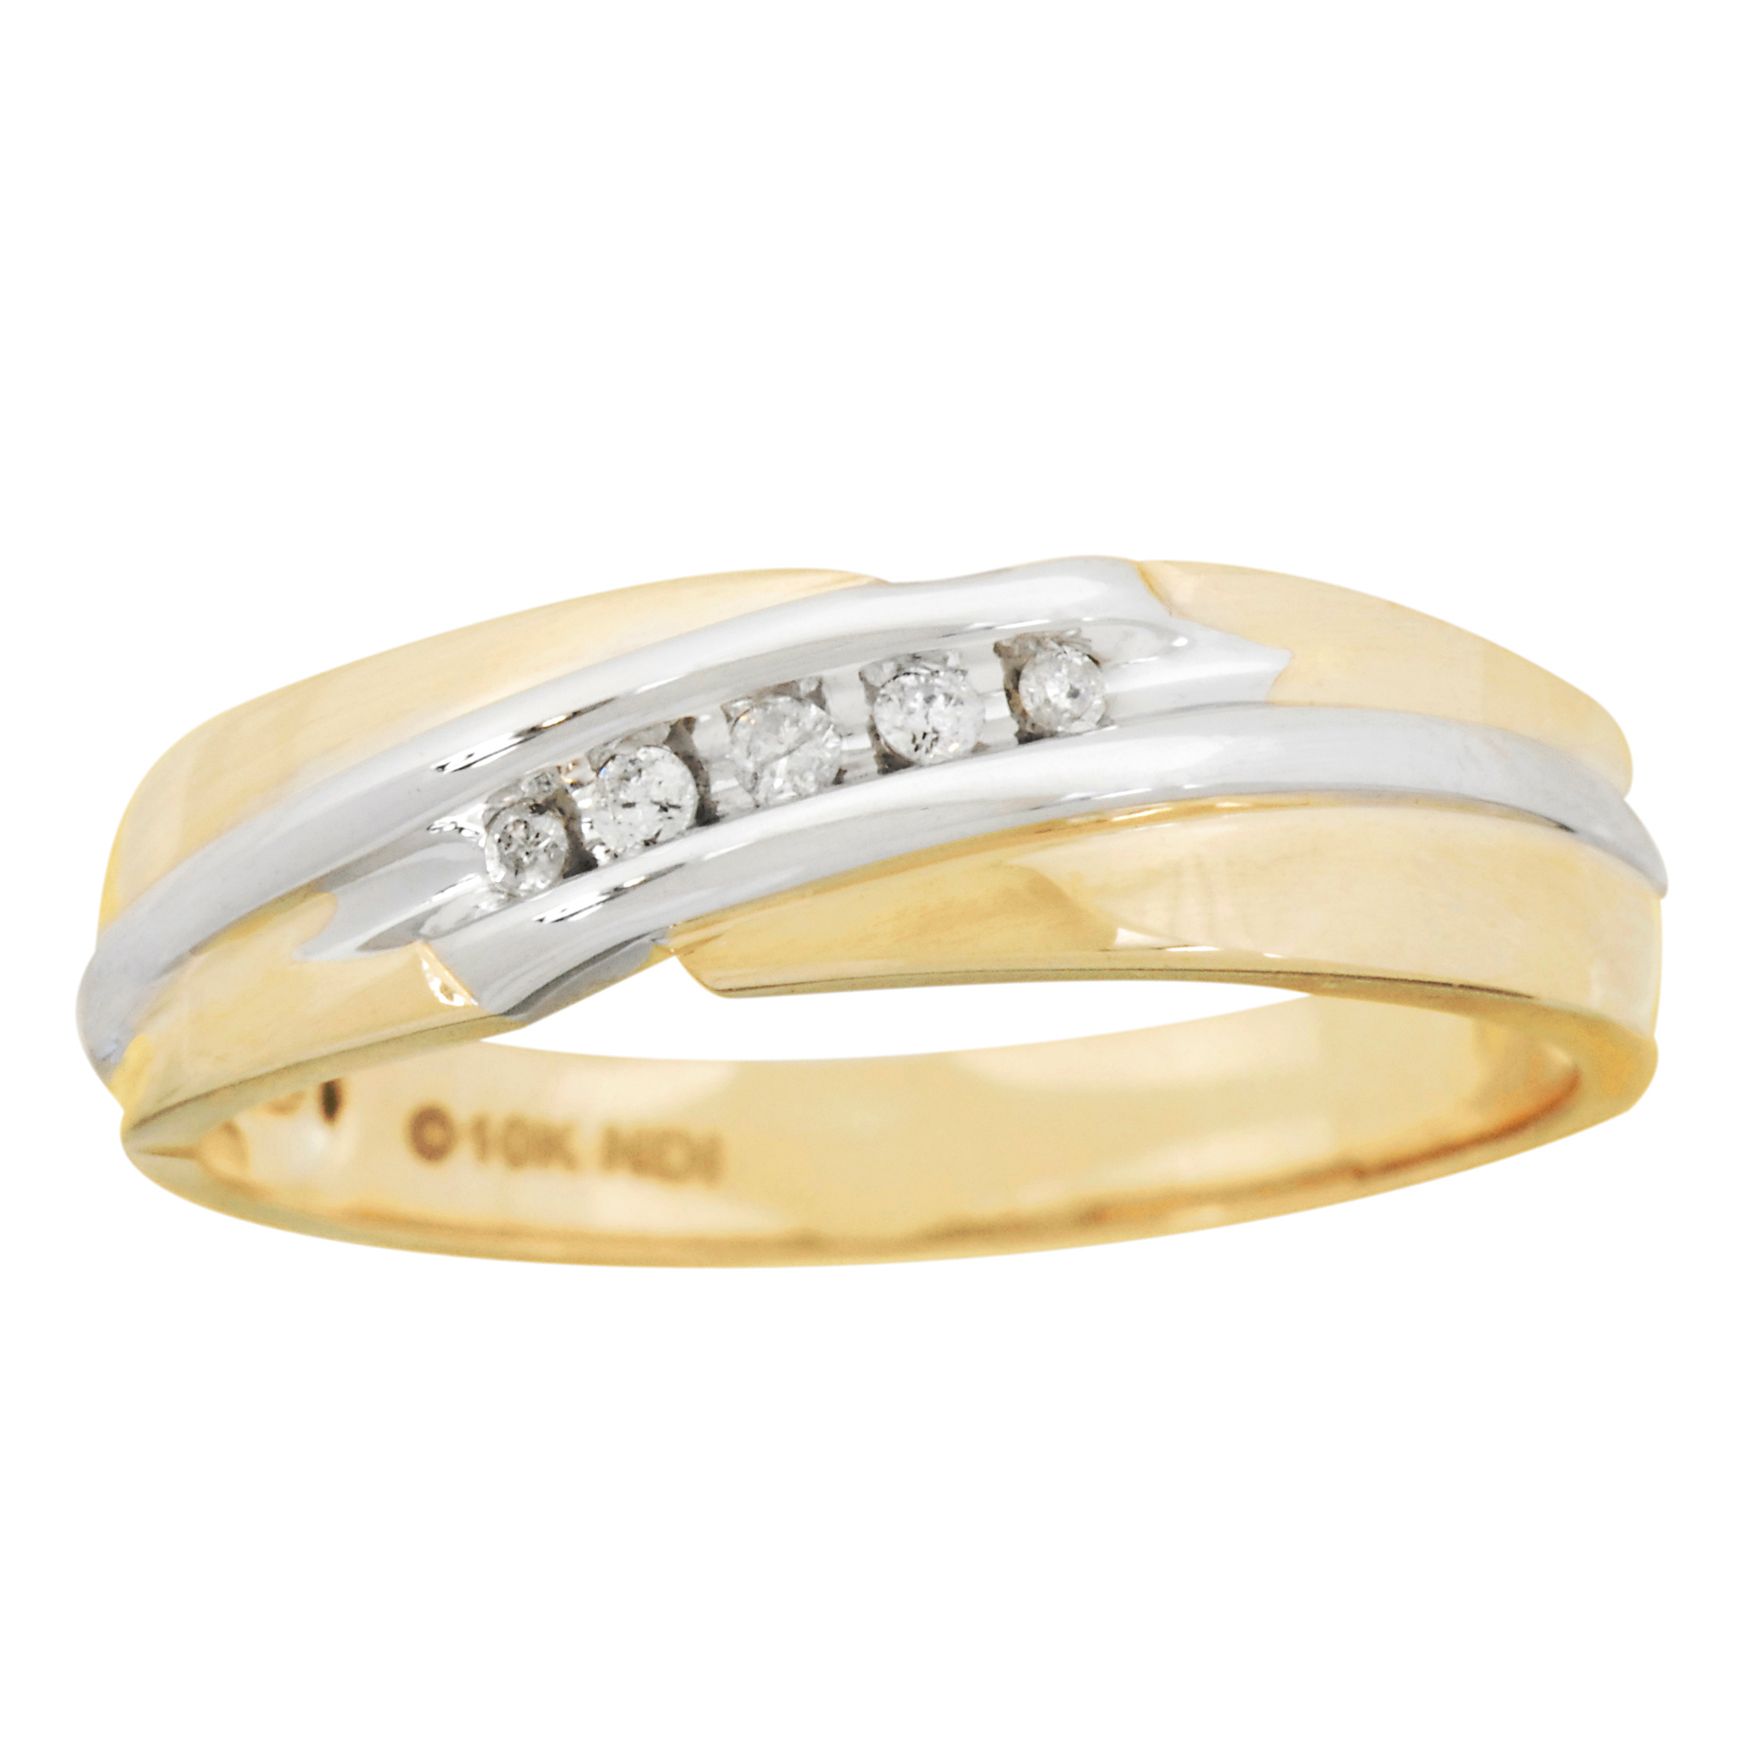 10k Two-tone Gold Mens Wedding Ring with Diamond Accents